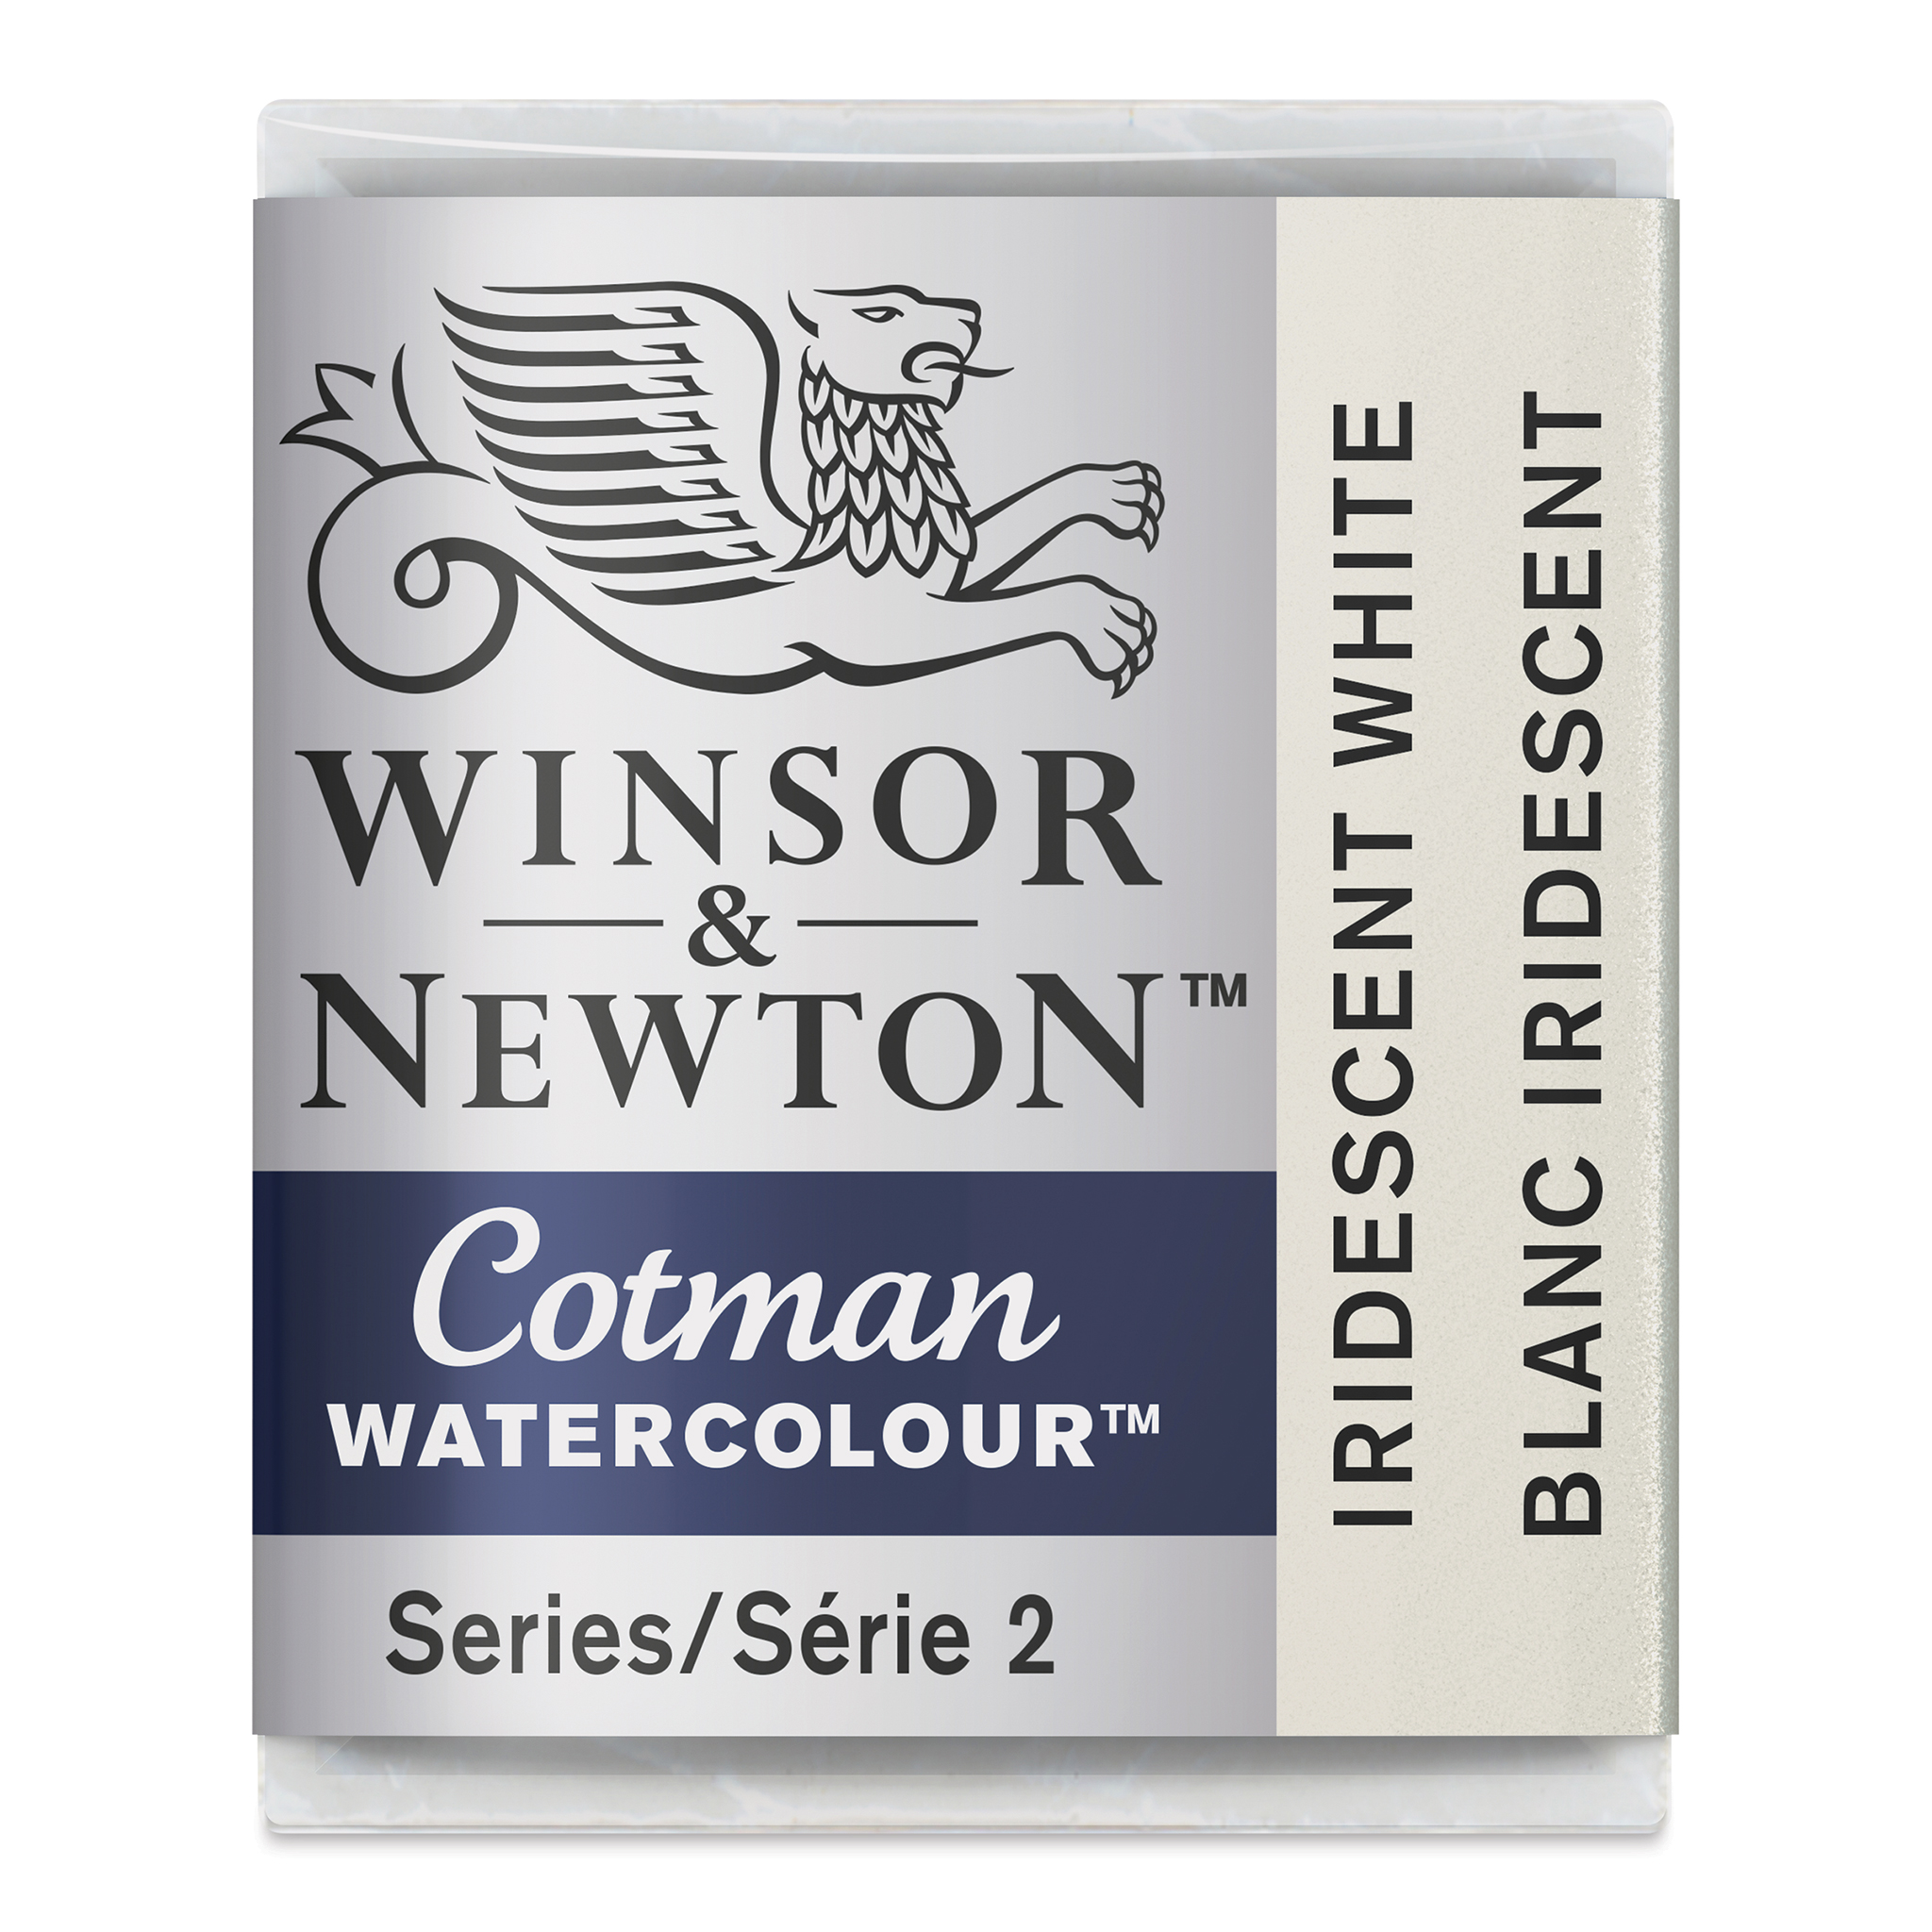 Make your own Iridescent Watercolour Paint Using Winsor & Newton